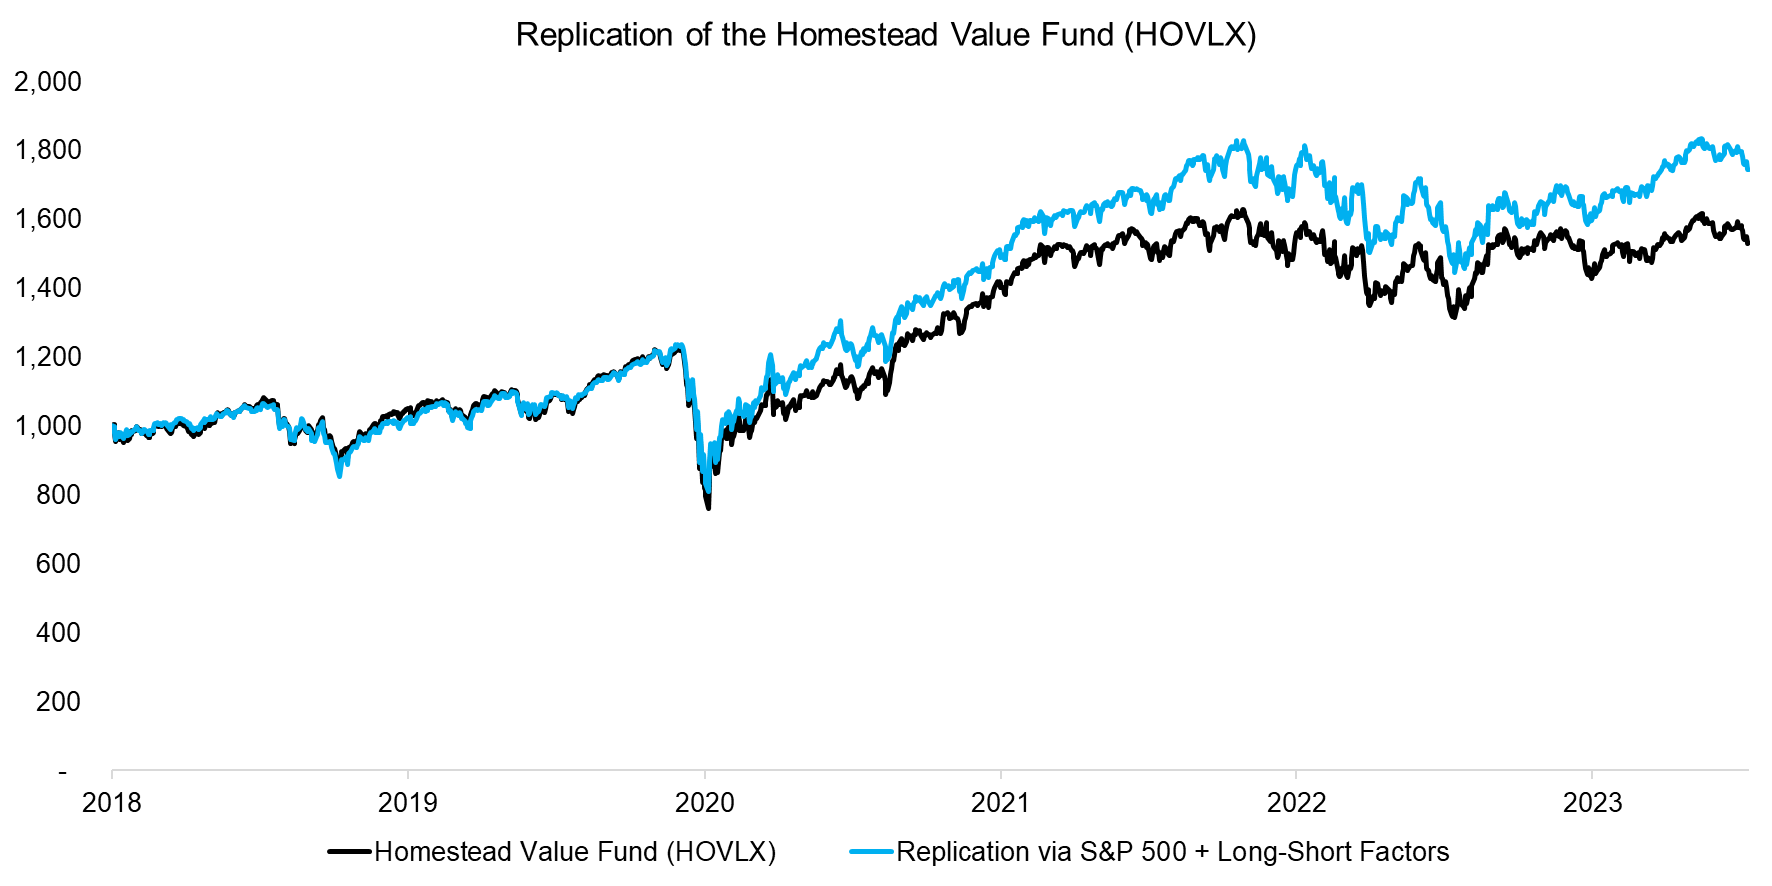 Replication of the Homestead Value Fund (HOVLX)